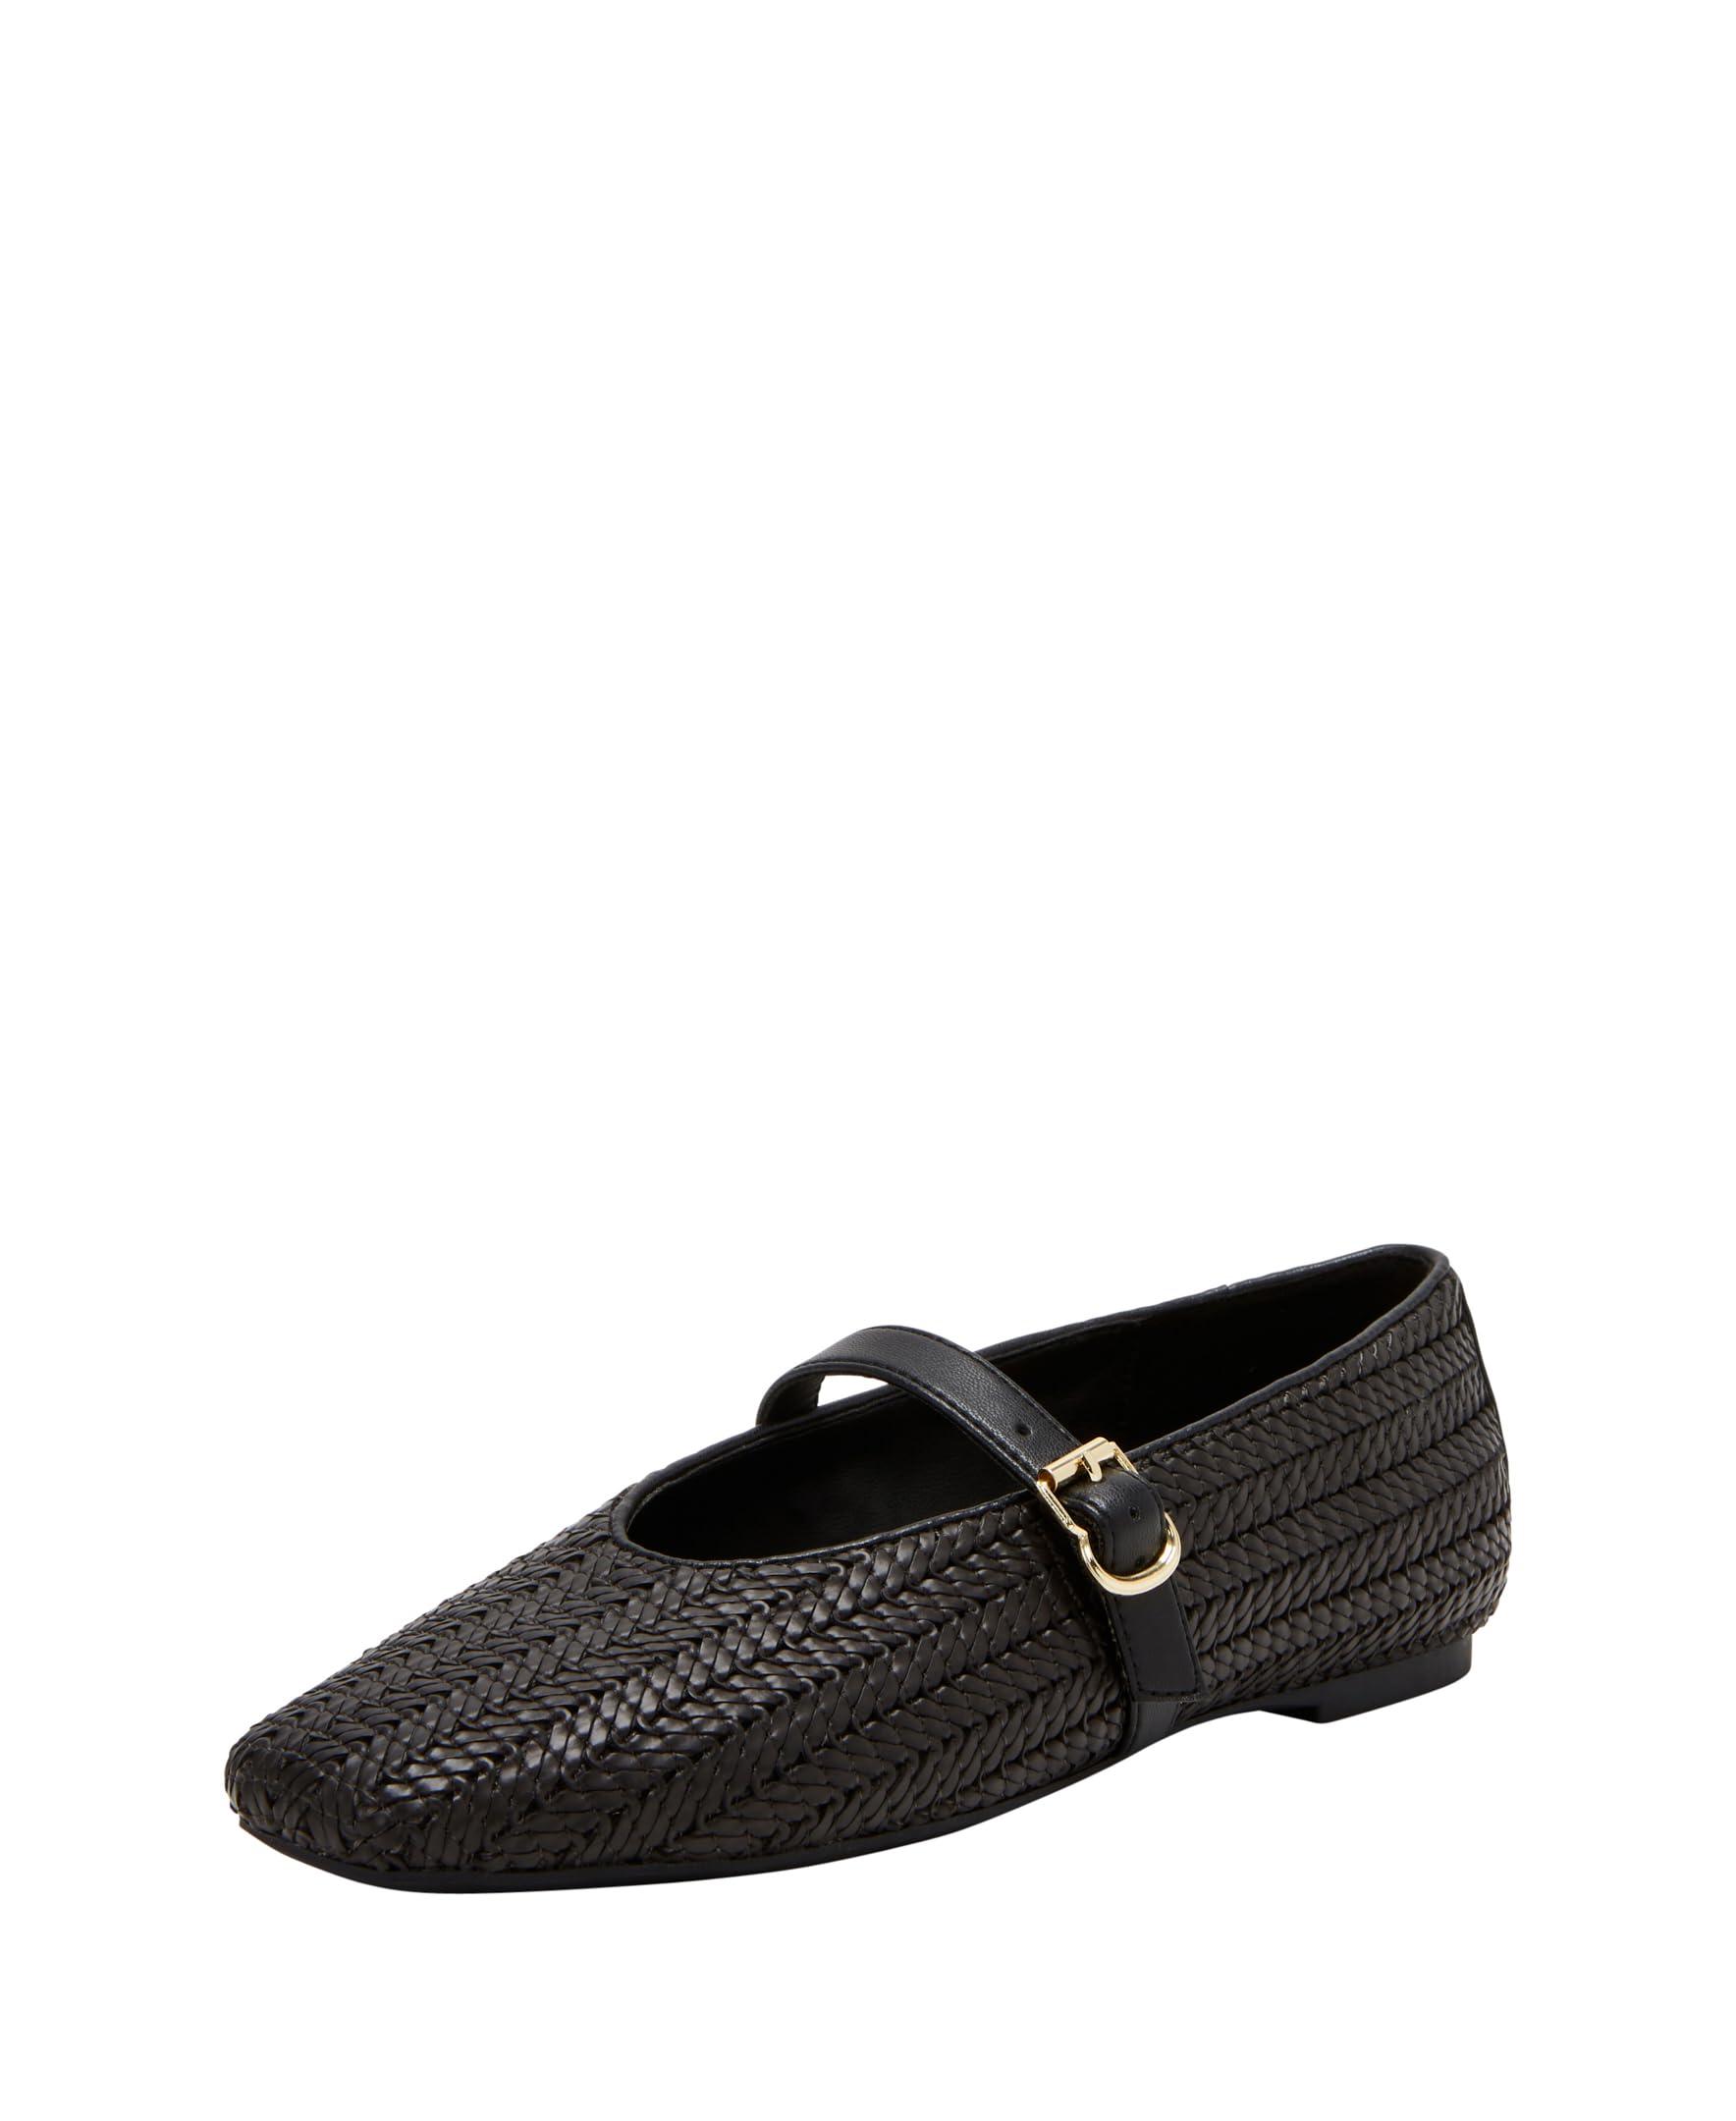 Katy Perry The Evie Mary Jane Woven Flat in Black | Lyst